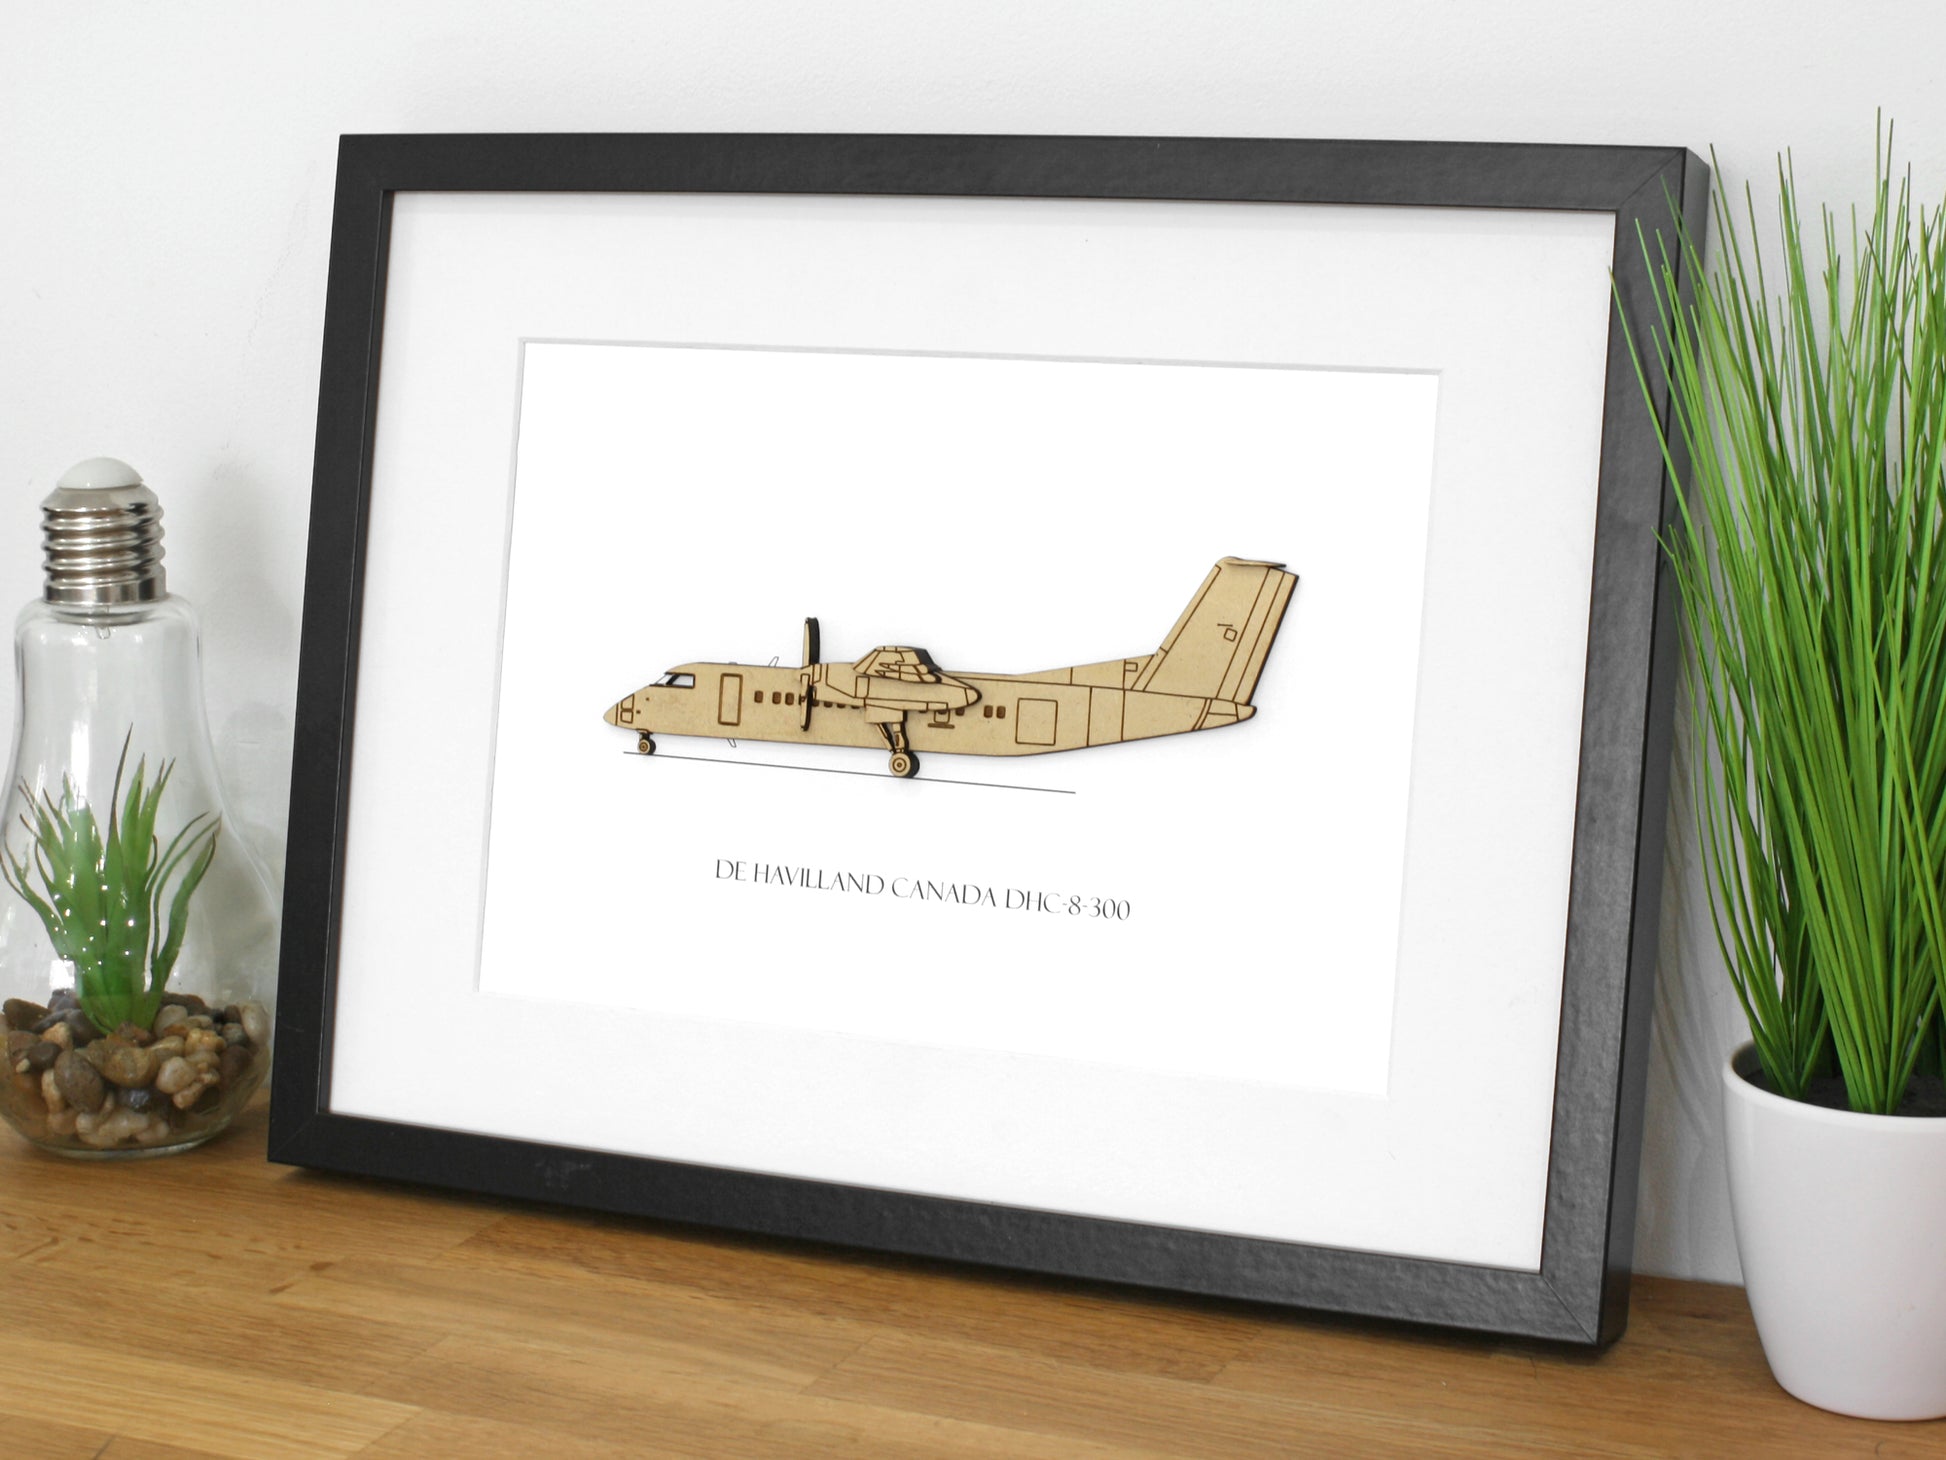 DHC-8-300 pilot gifts